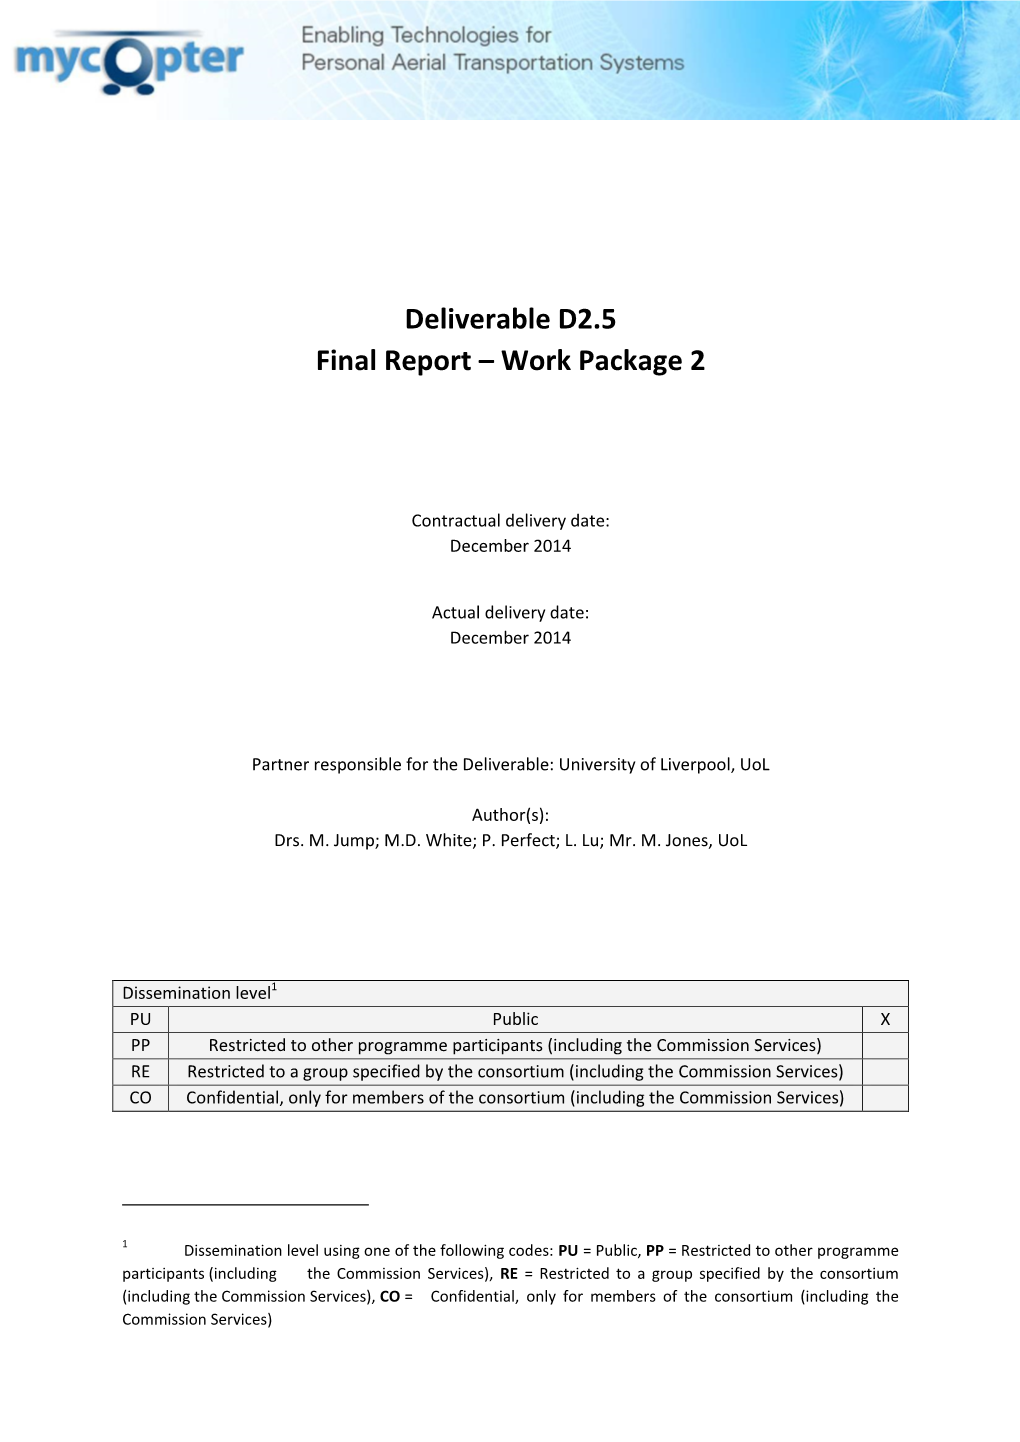 Deliverable D2.5 Final Report – Work Package 2